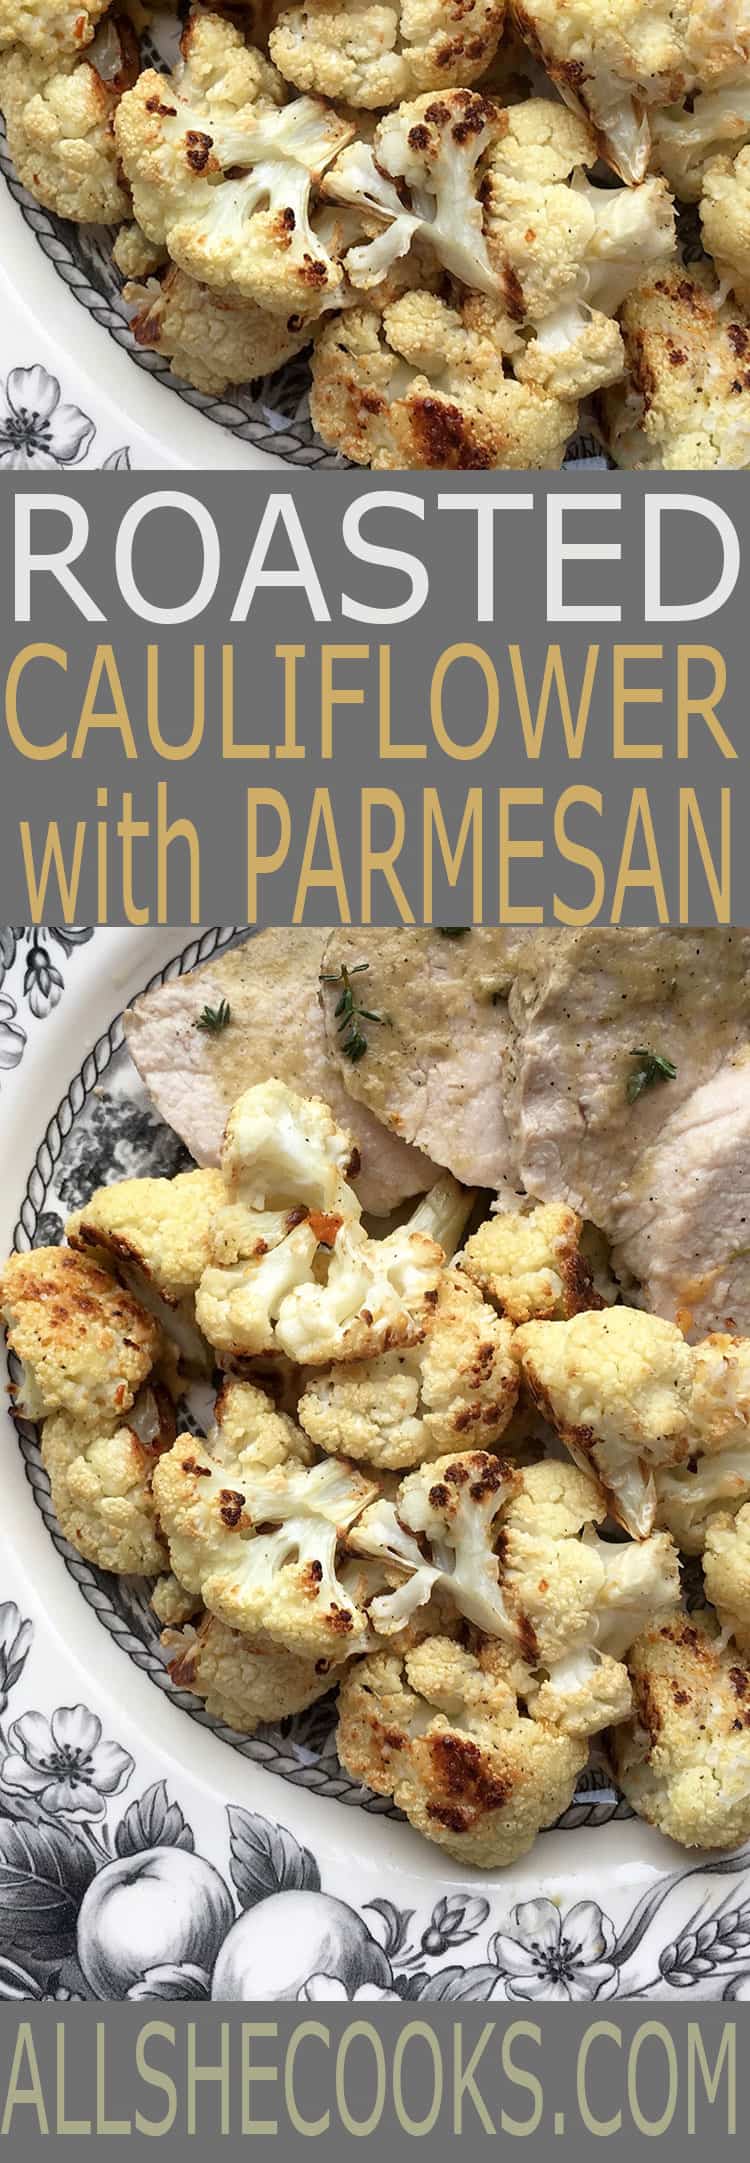 Roasted Cauliflower with Parmesan is a little spicy and a perfect side dish to pair with pork, chicken and so many other main dishes.